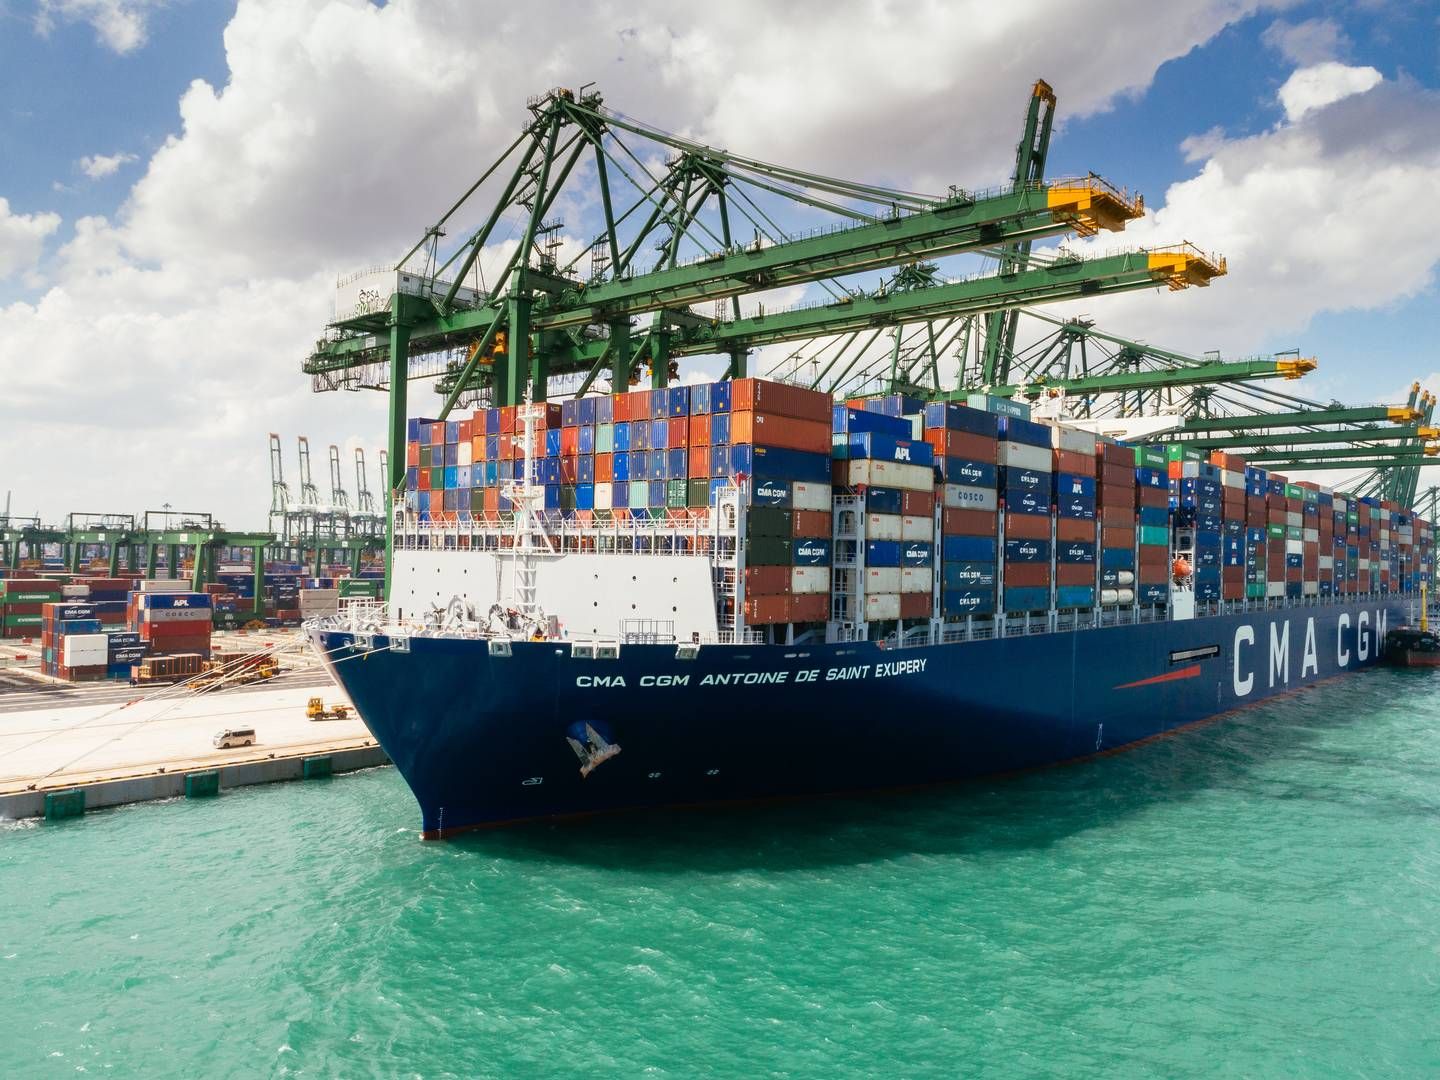 "In my view, the two shipowners’ sustainability pact could be the nucleus of a wider shipping industry representative body," says Philip Damas from consultancy house Drewry. | Foto: Pr / Cma Cgm